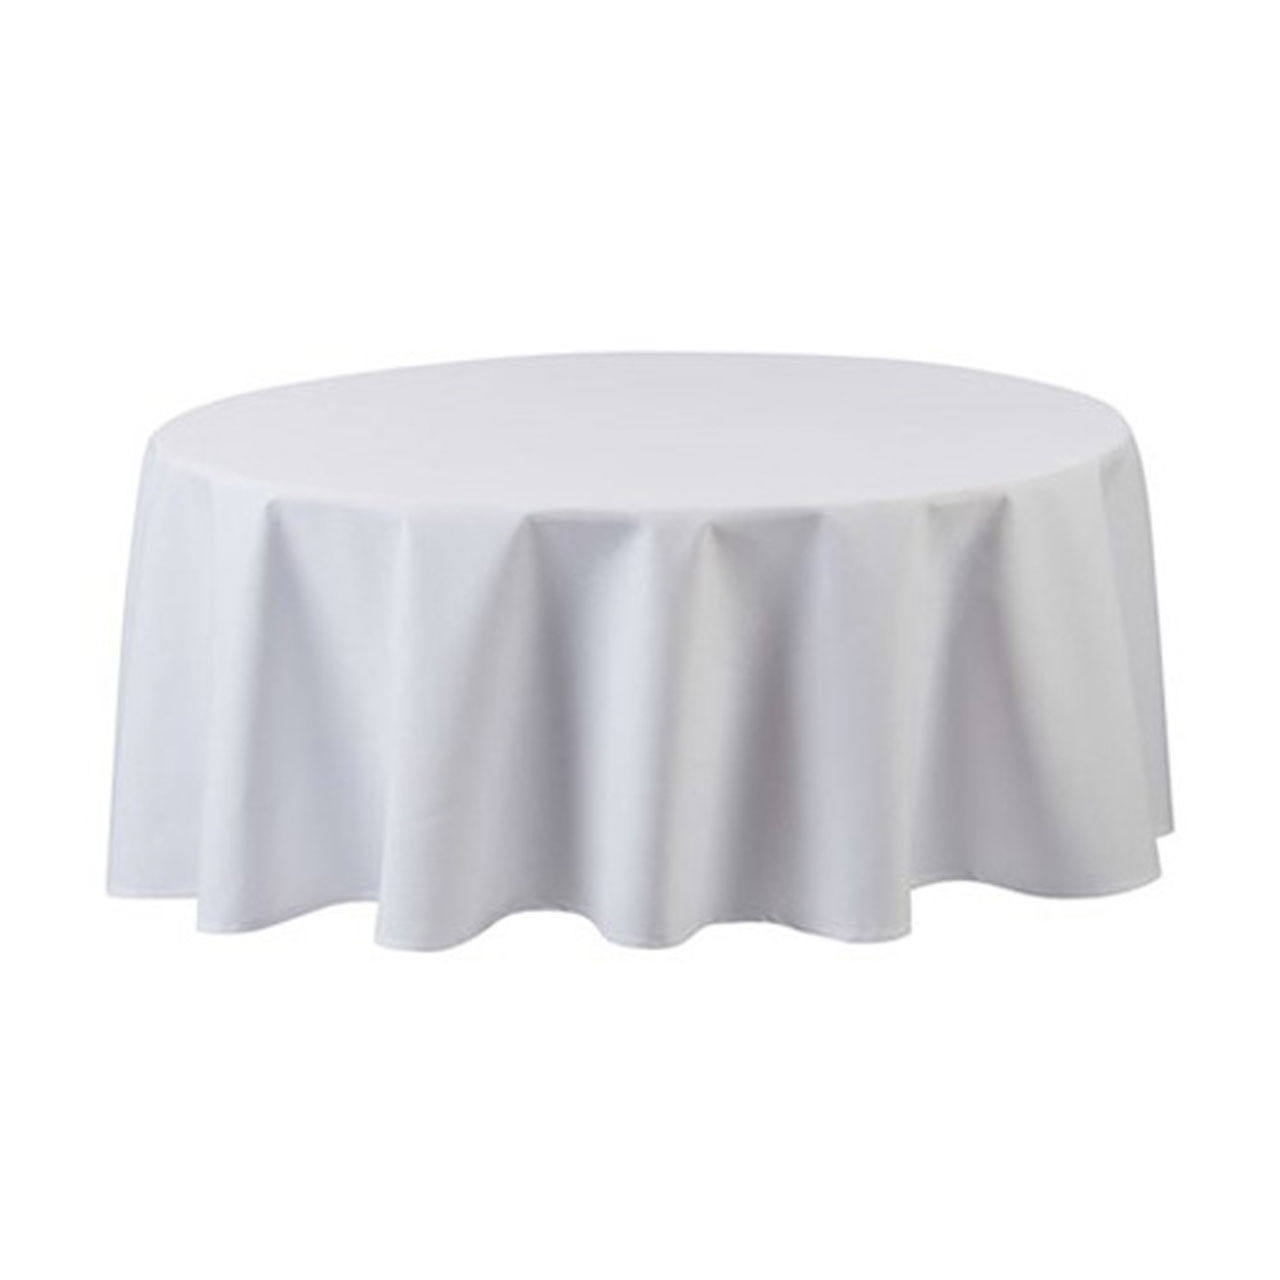 What technology is included in the Seamless White 120" Rounds Tablecloth?